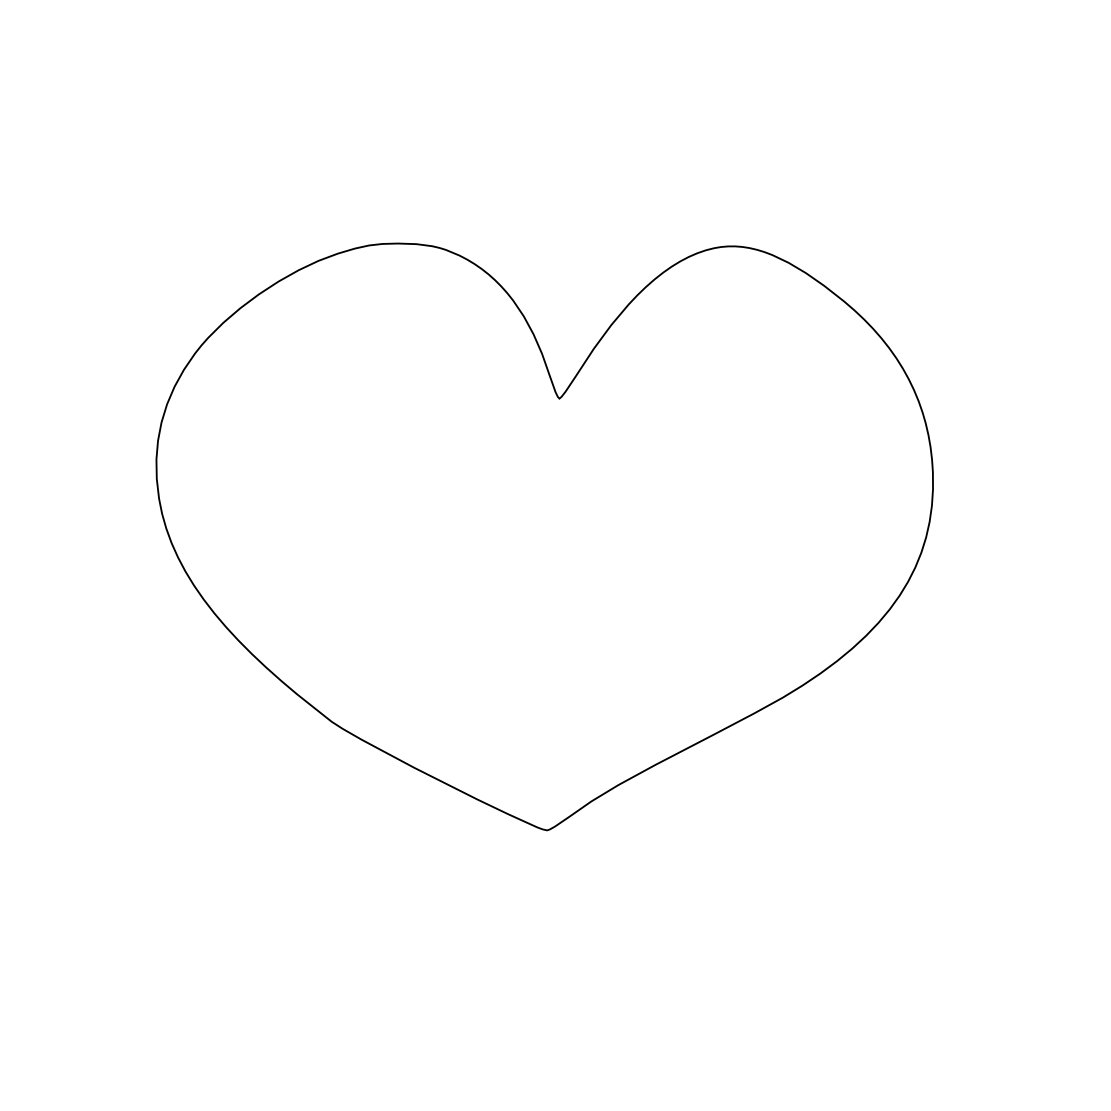 Heart clipart black and white heart clip art black and white free cliparts that you can download